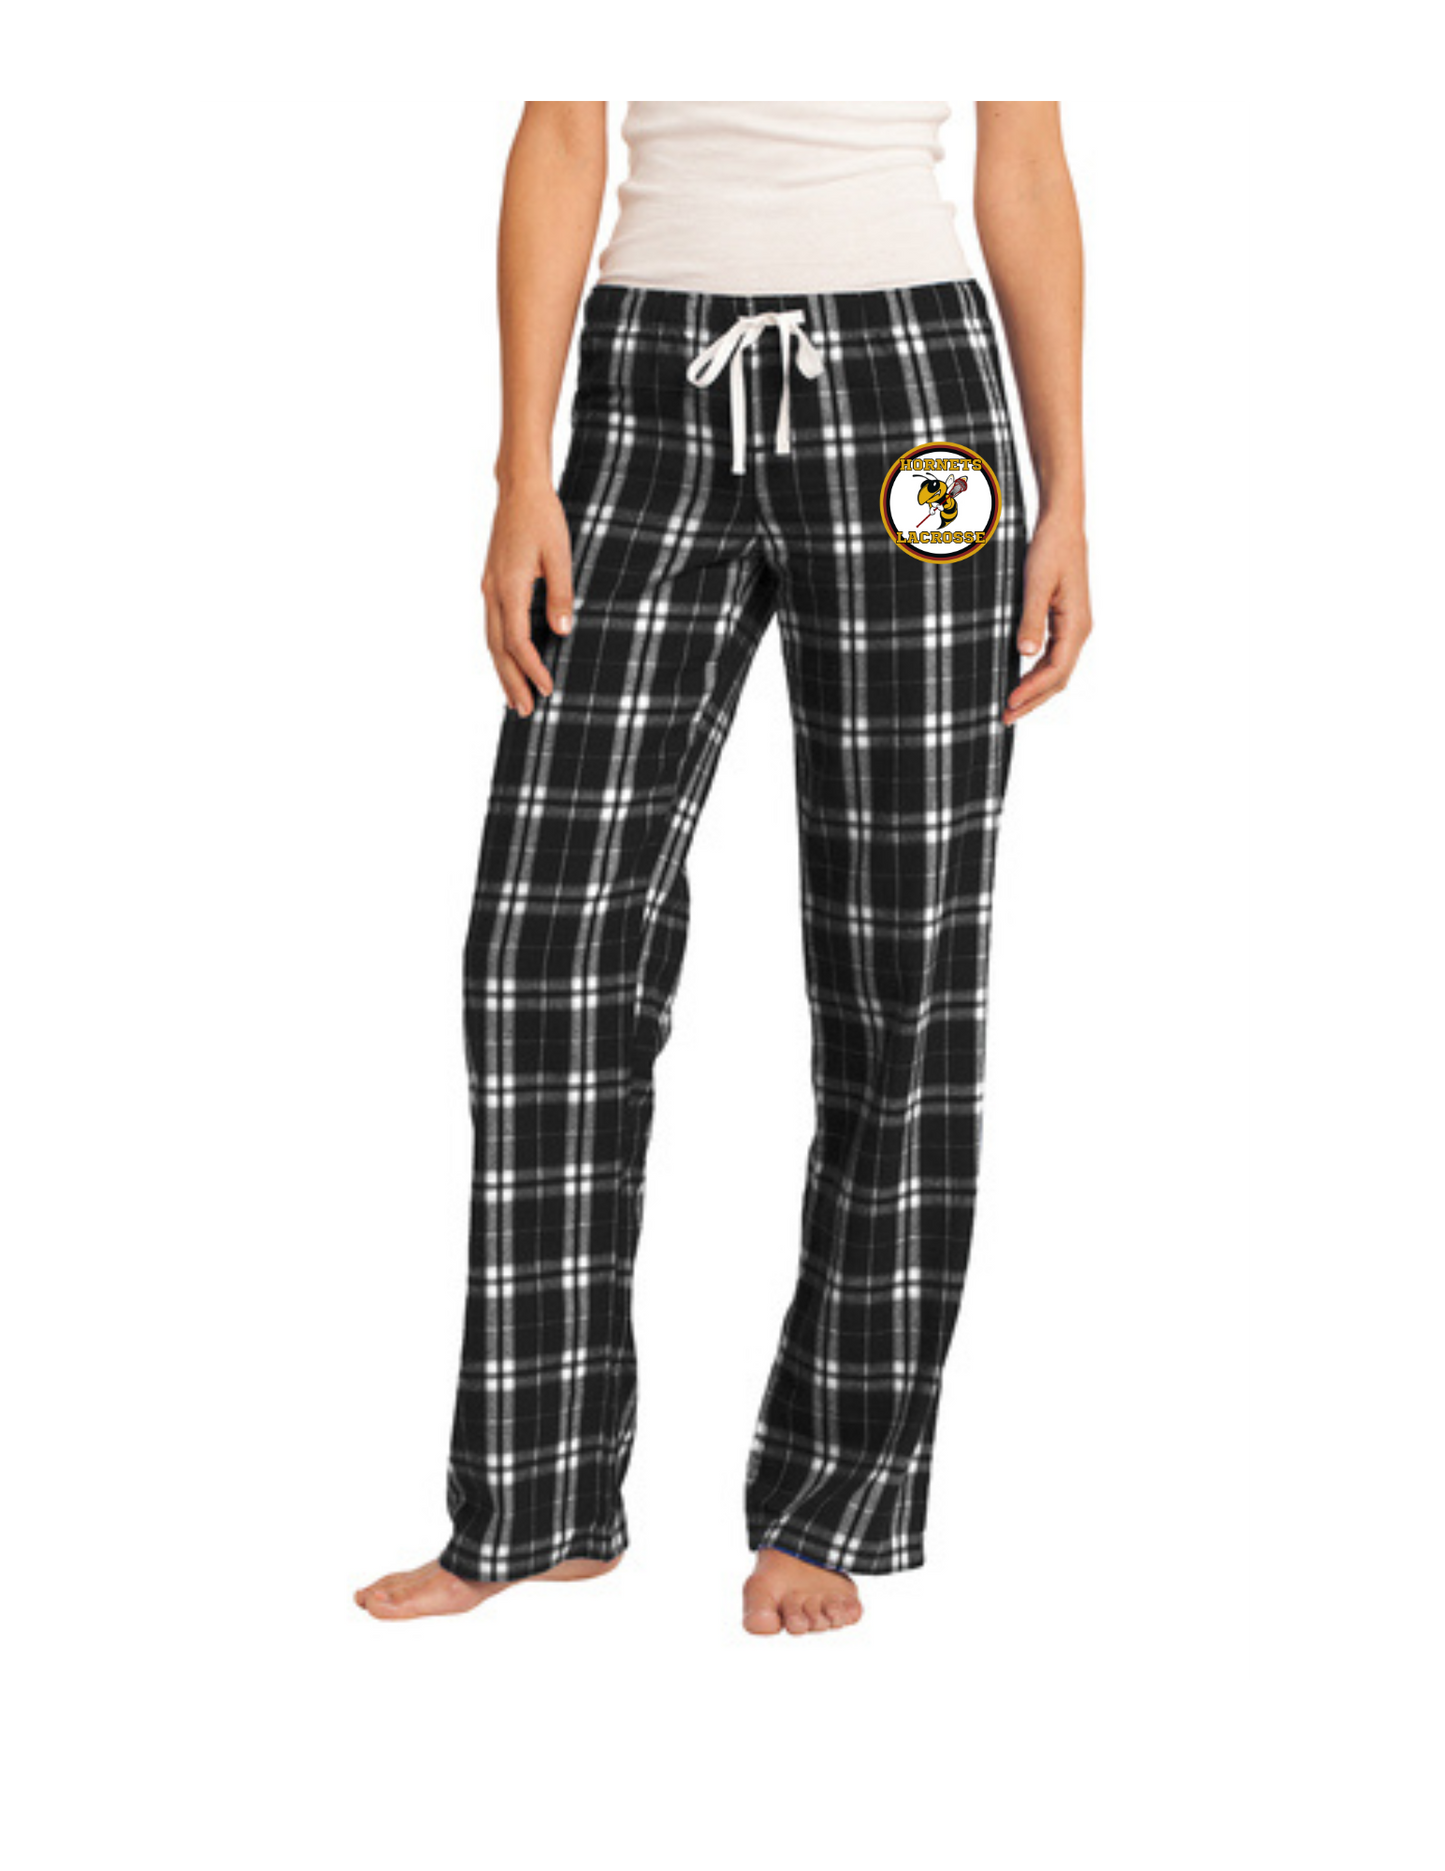 Hornets Lacrosse Pajama Pants (click for more options)